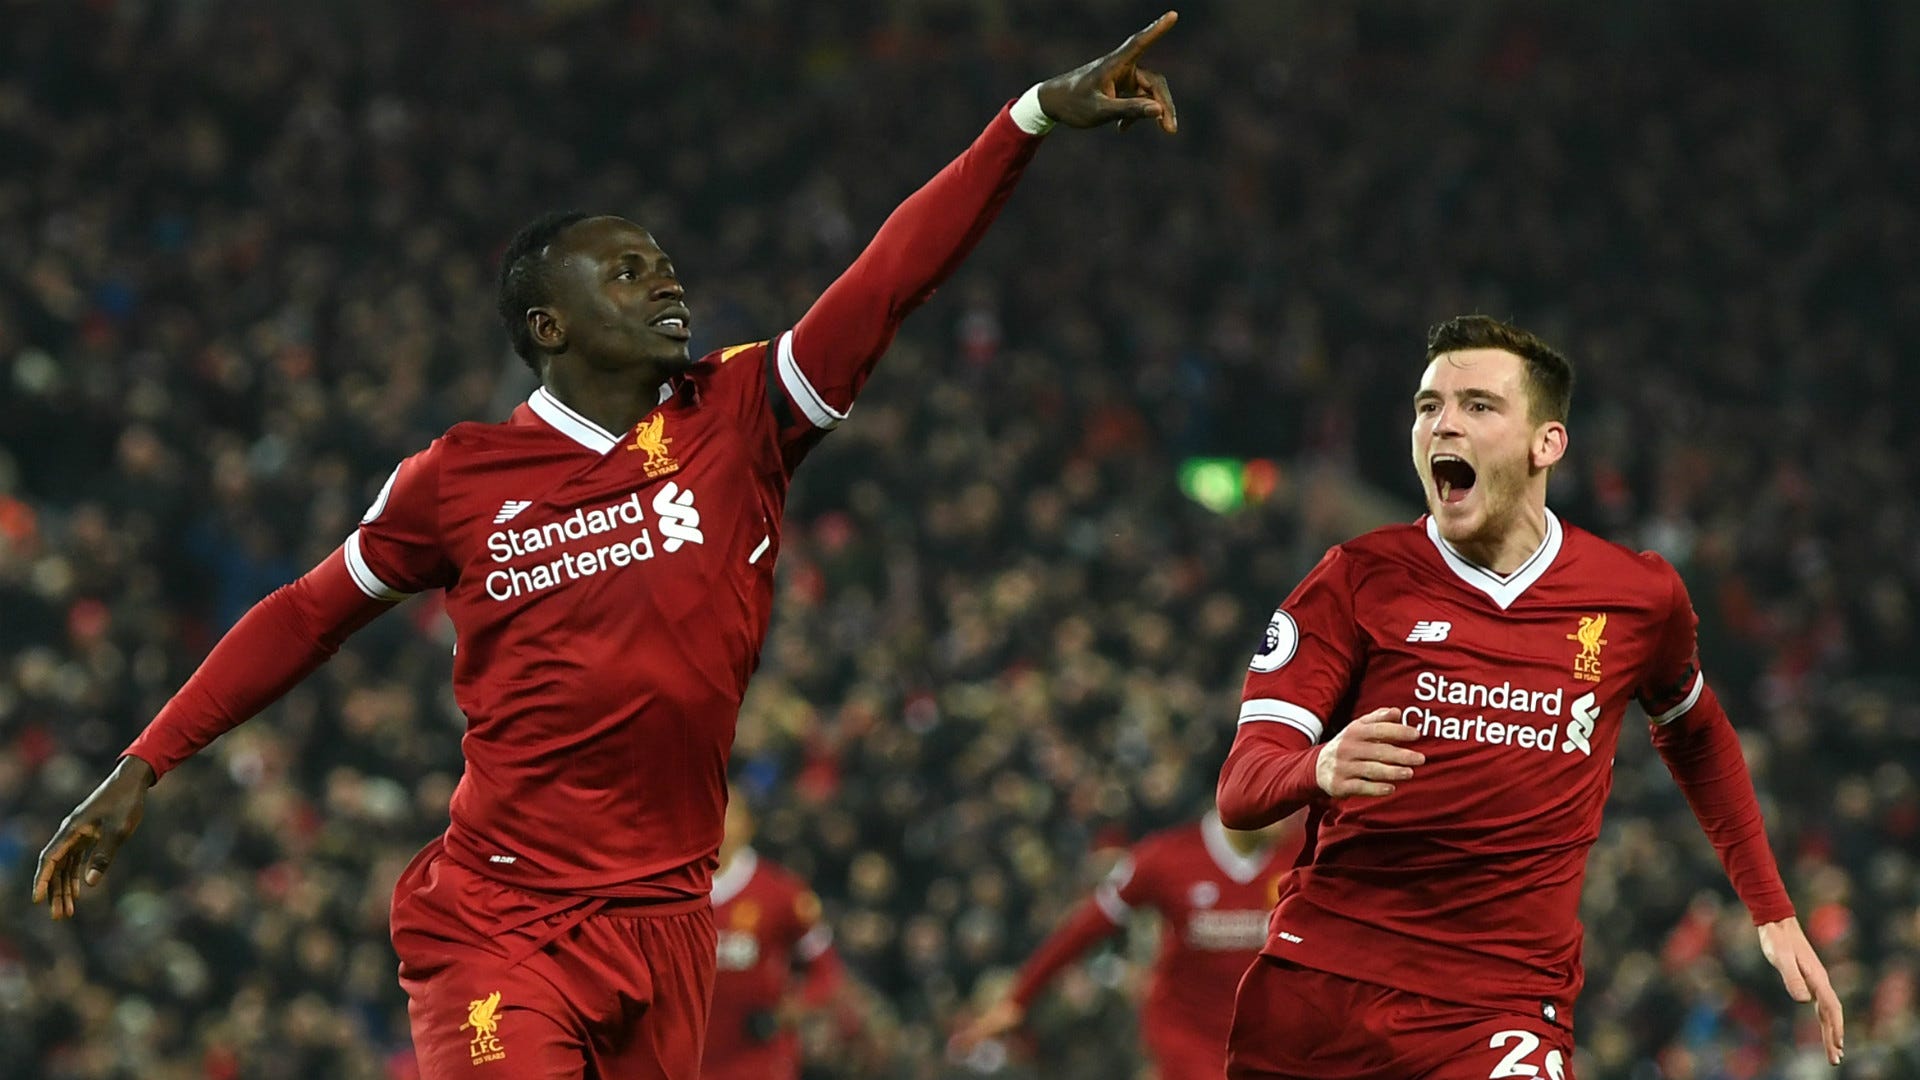 Liverpool vs swansea betting preview goal destiny etheric light location